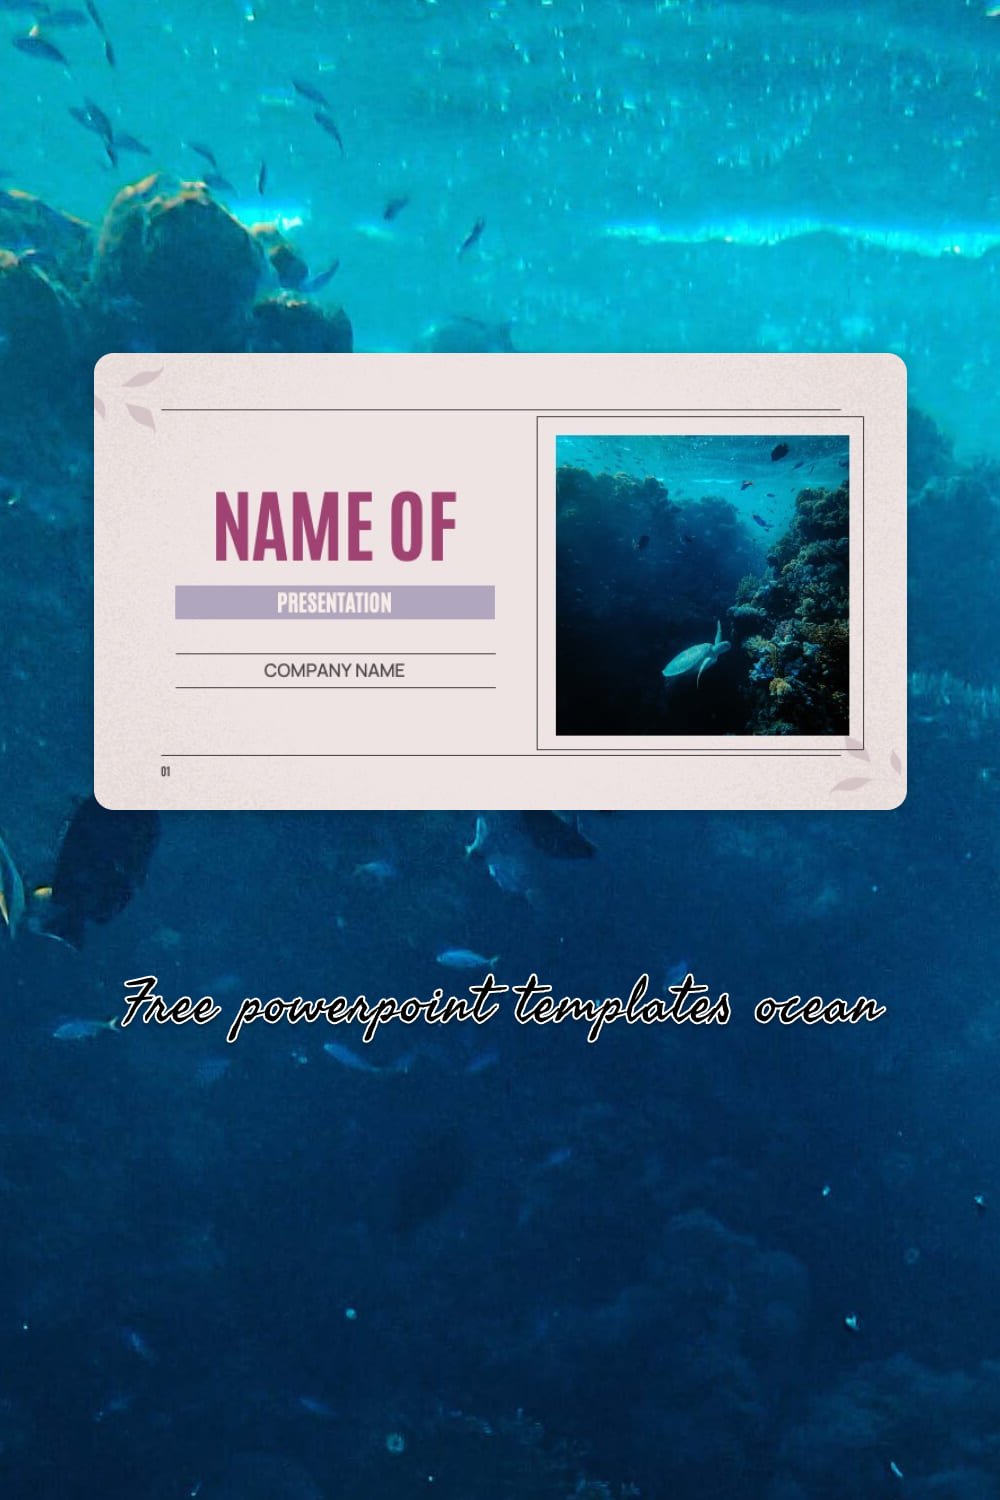 Free powerpoint templates ocean - pinterest image preview.